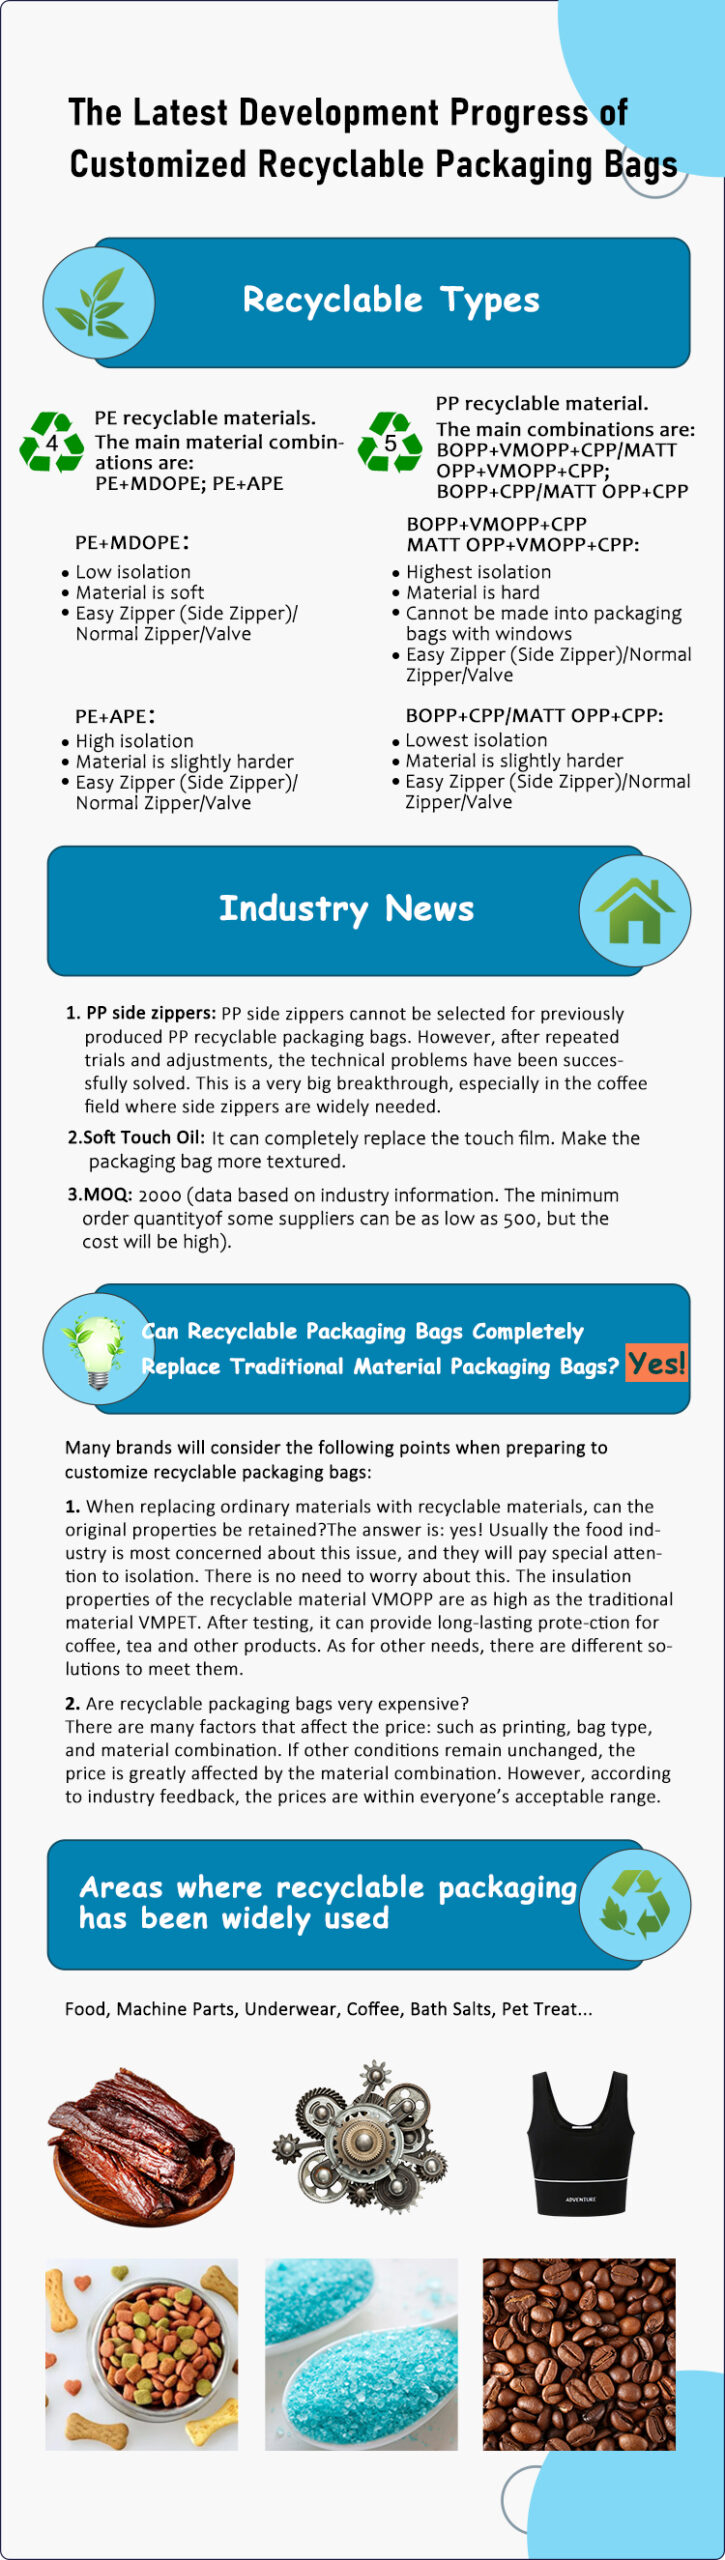 What You Should Know about Recyclable Packaging Bags
